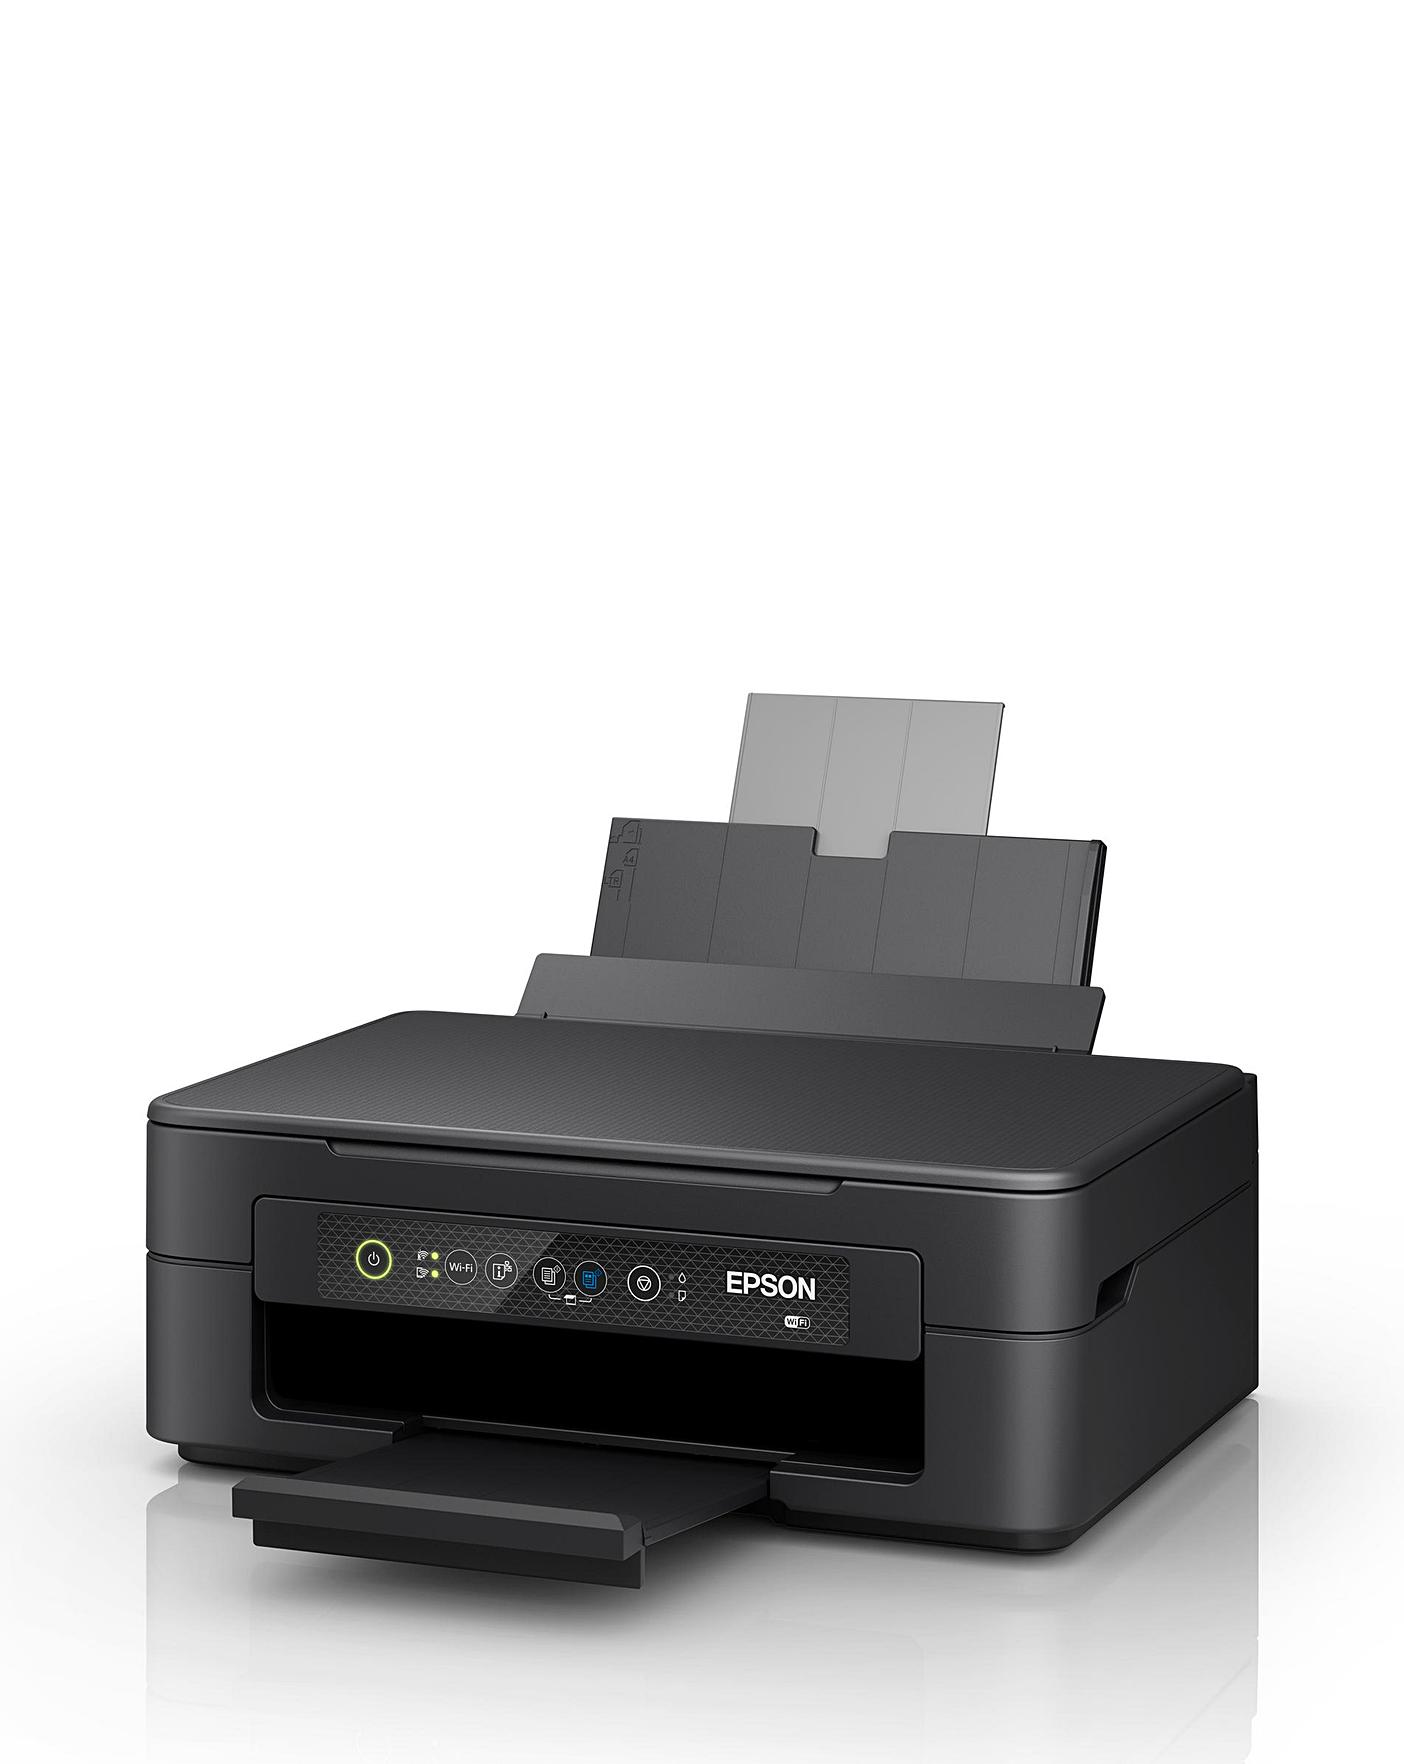 Product  Epson Expression Home XP-2200 - multifunction printer - colour